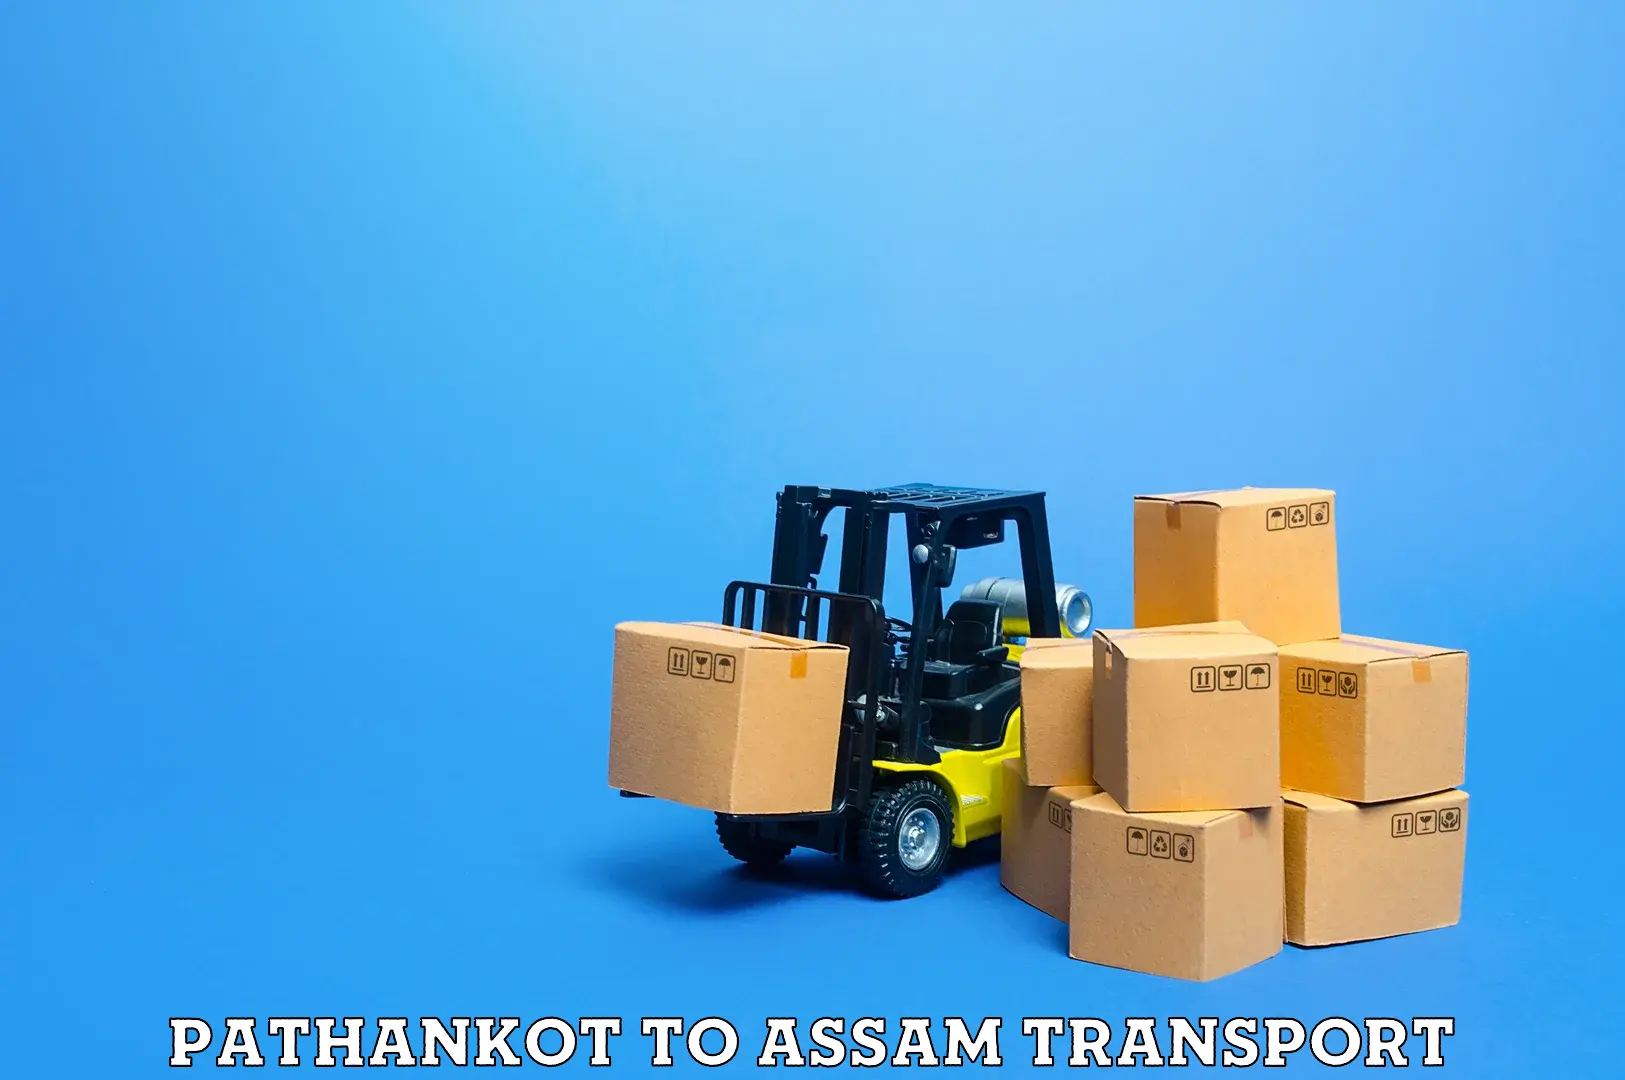 Container transport service Pathankot to Dhubri